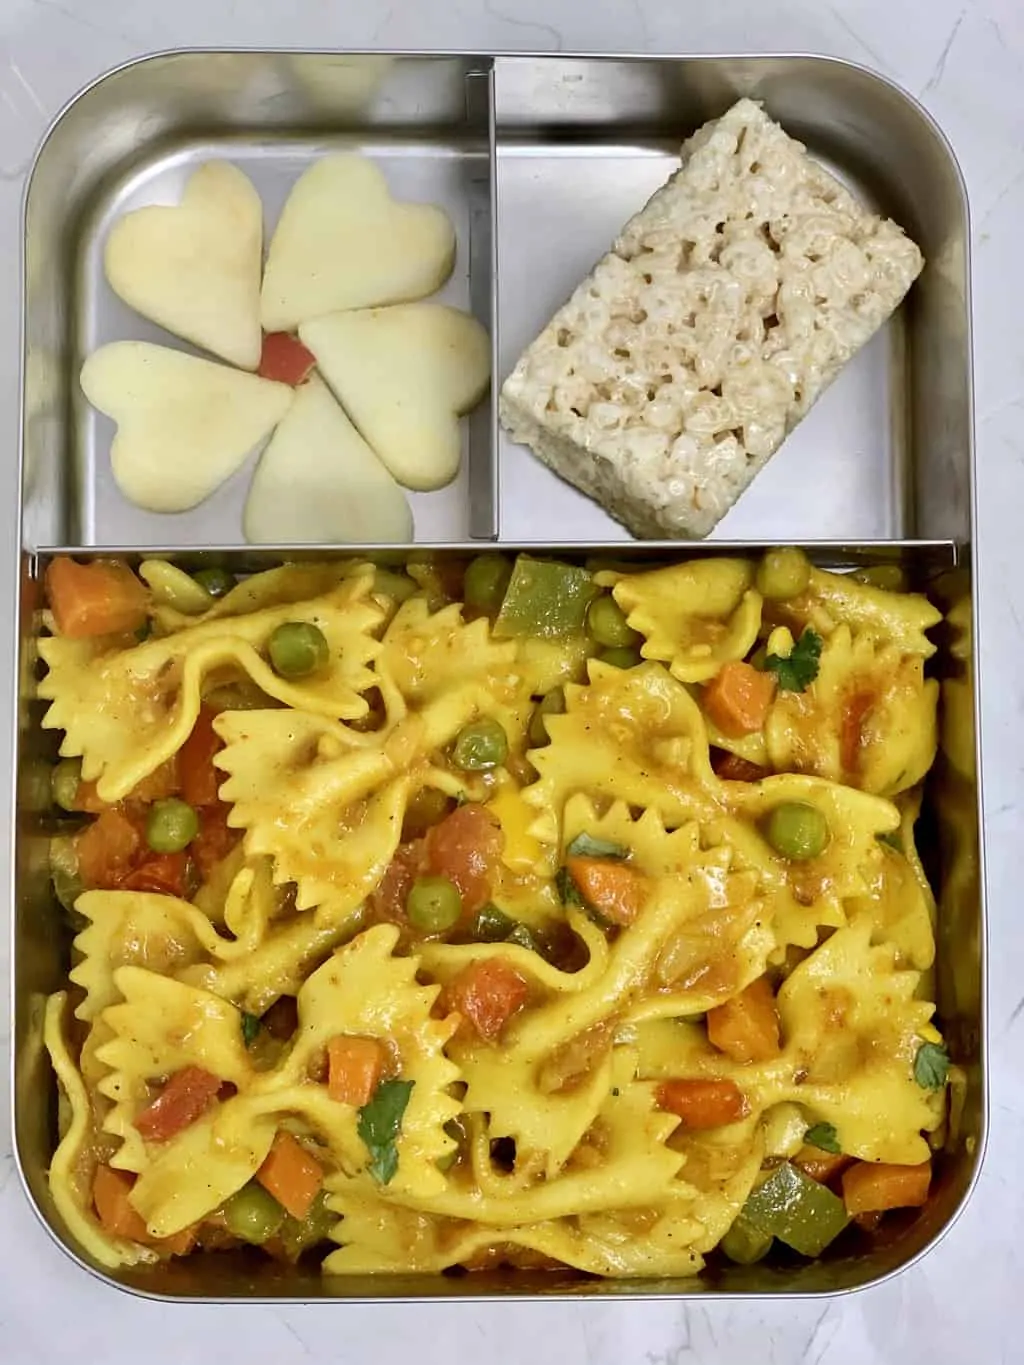 Masala Pasta in kids lunch box with Rice Krispies and Apple